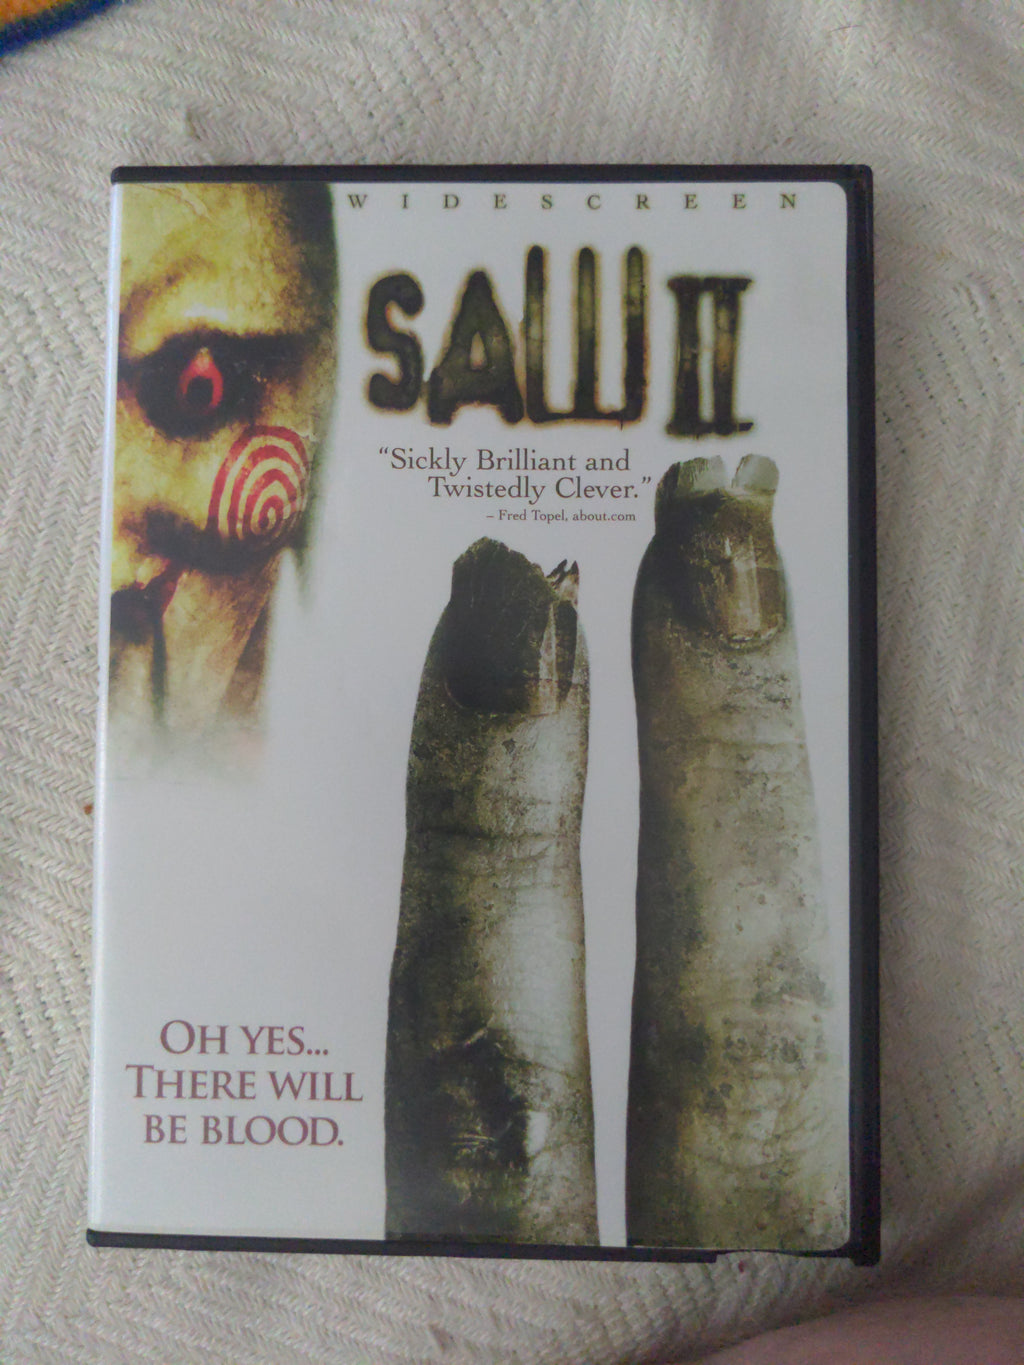 Saw II Widescreen Horror DVD - Donnie Wahlberg - Dina Meyer